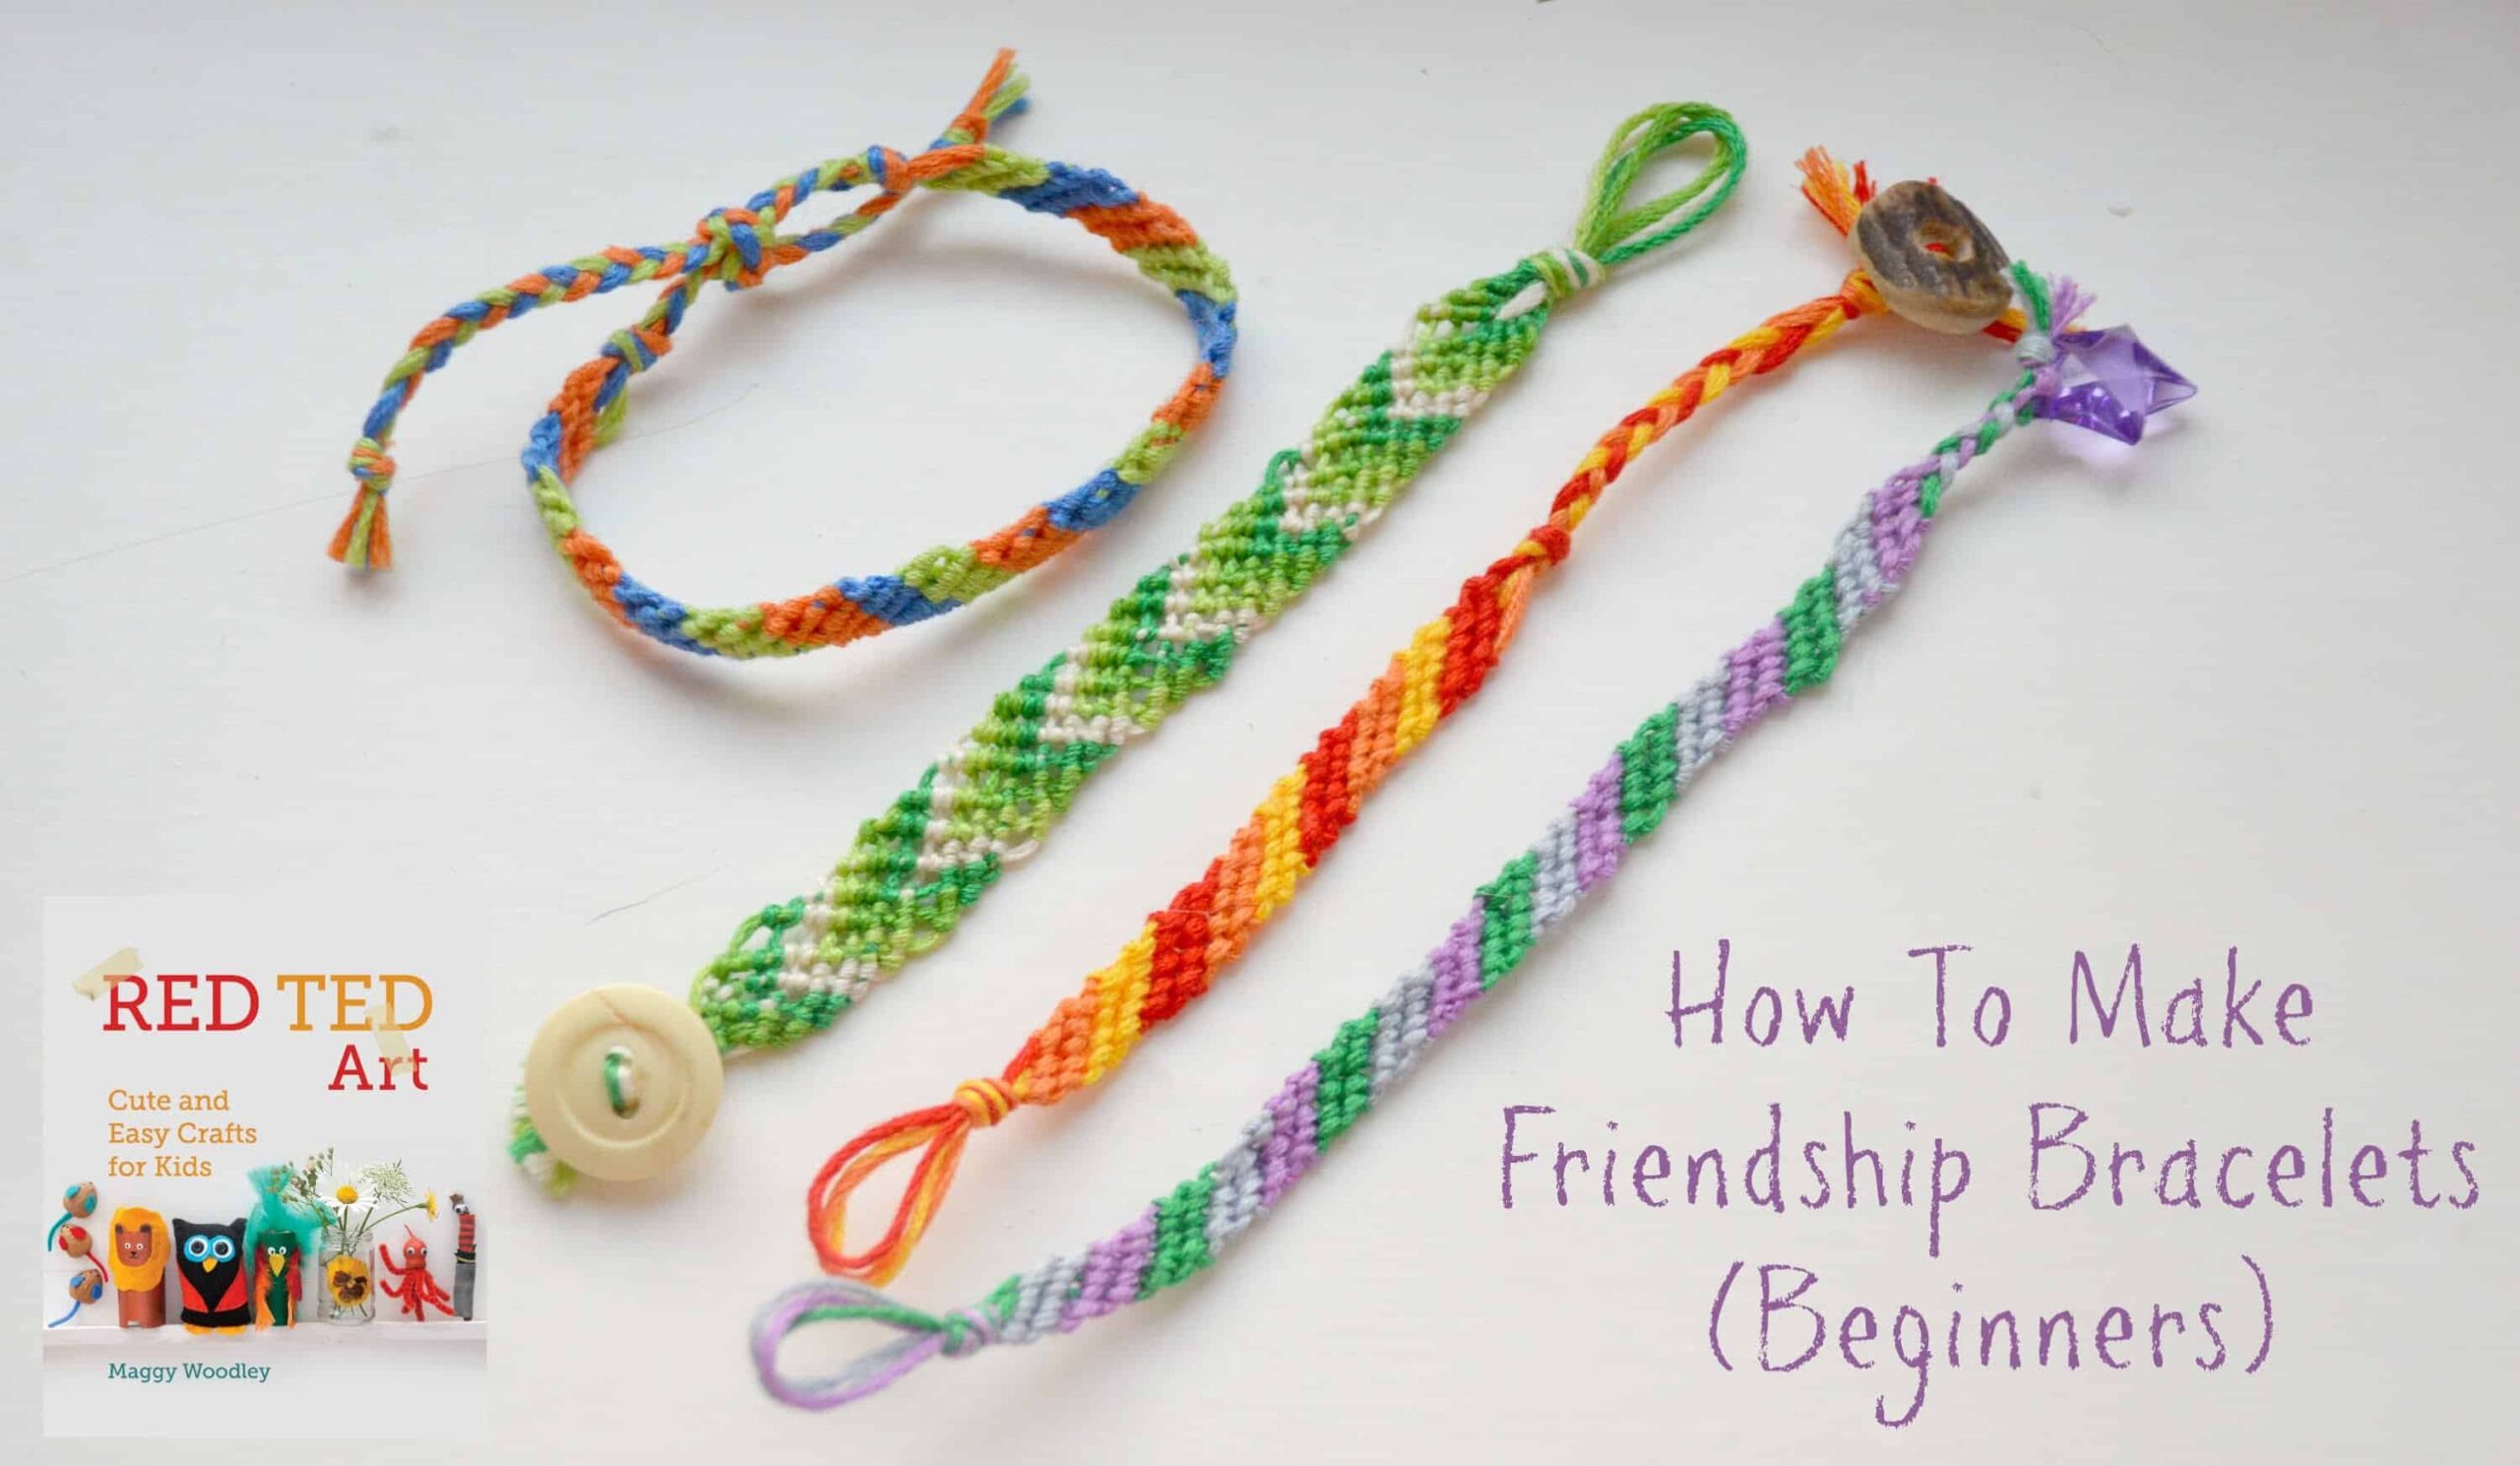 15 friendship bracelets for kids to make in summer camp and beyond!